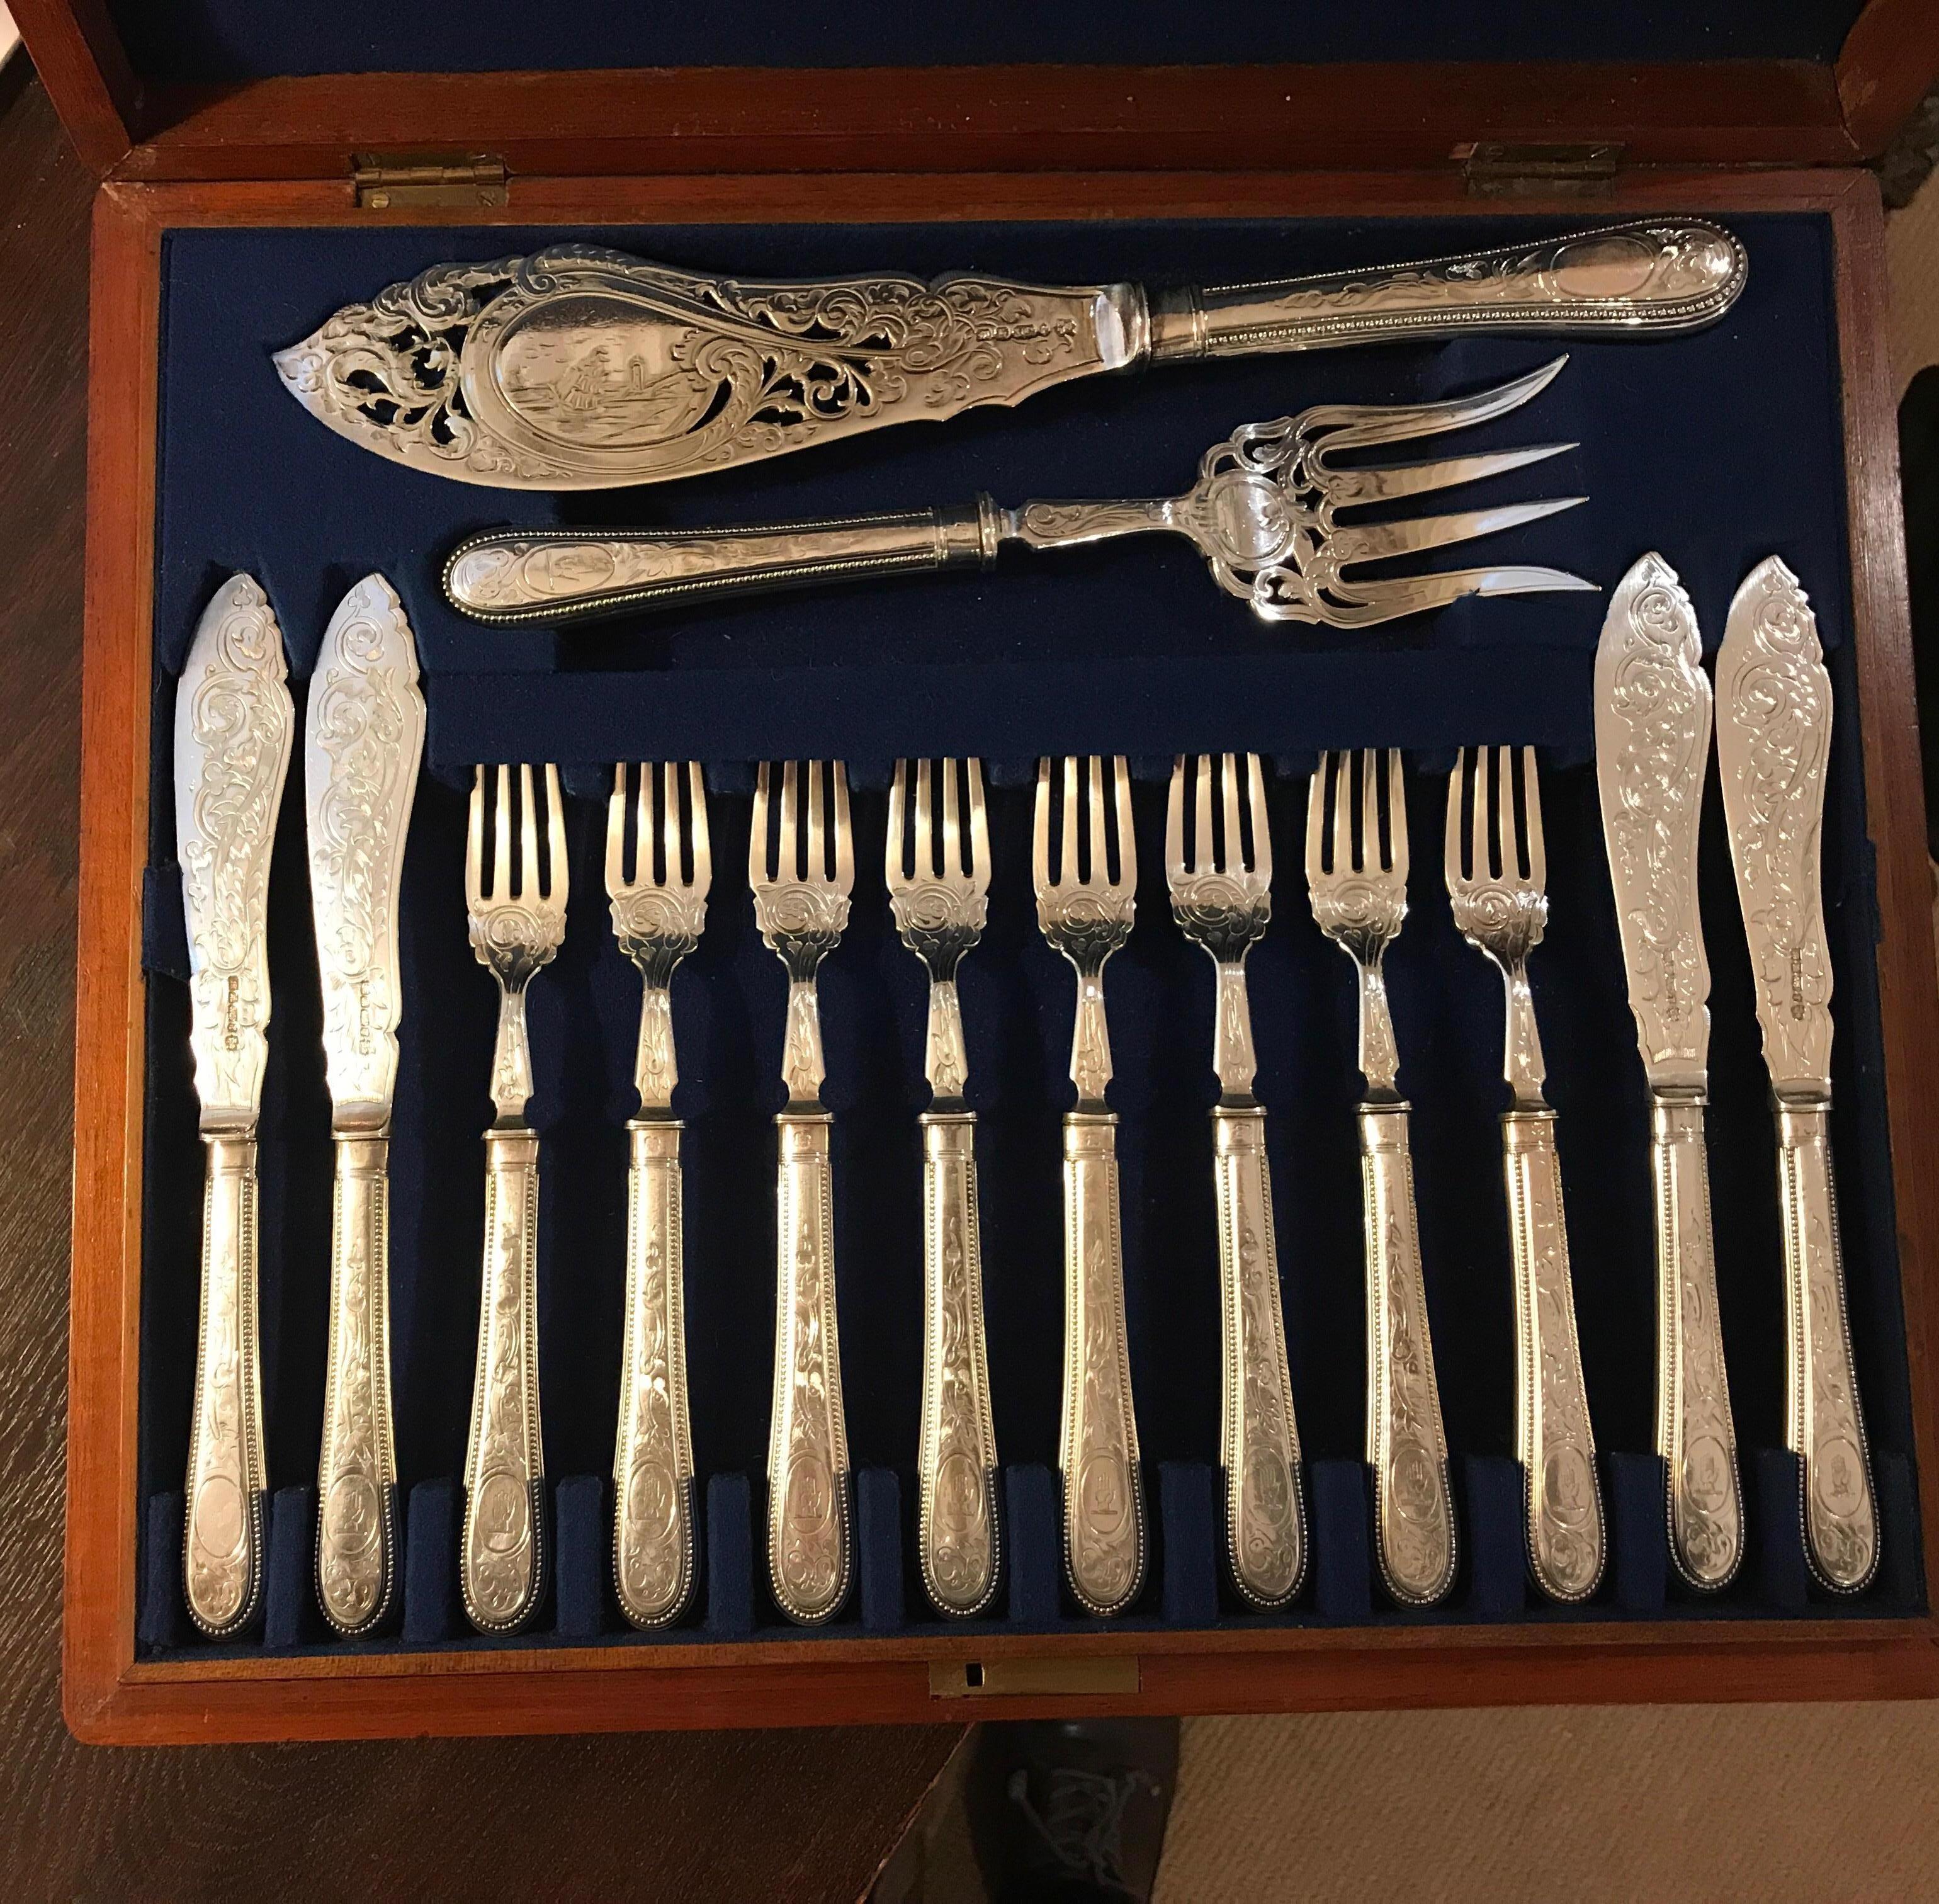 Elegant English fish service with 18 forks, 17 knives, plus large 2 pieced fish serving pieces. The mahogany box, with brass shield plaque with three trays with the silver plated and engraved fish set. Each piece has a full set of English hallmarks